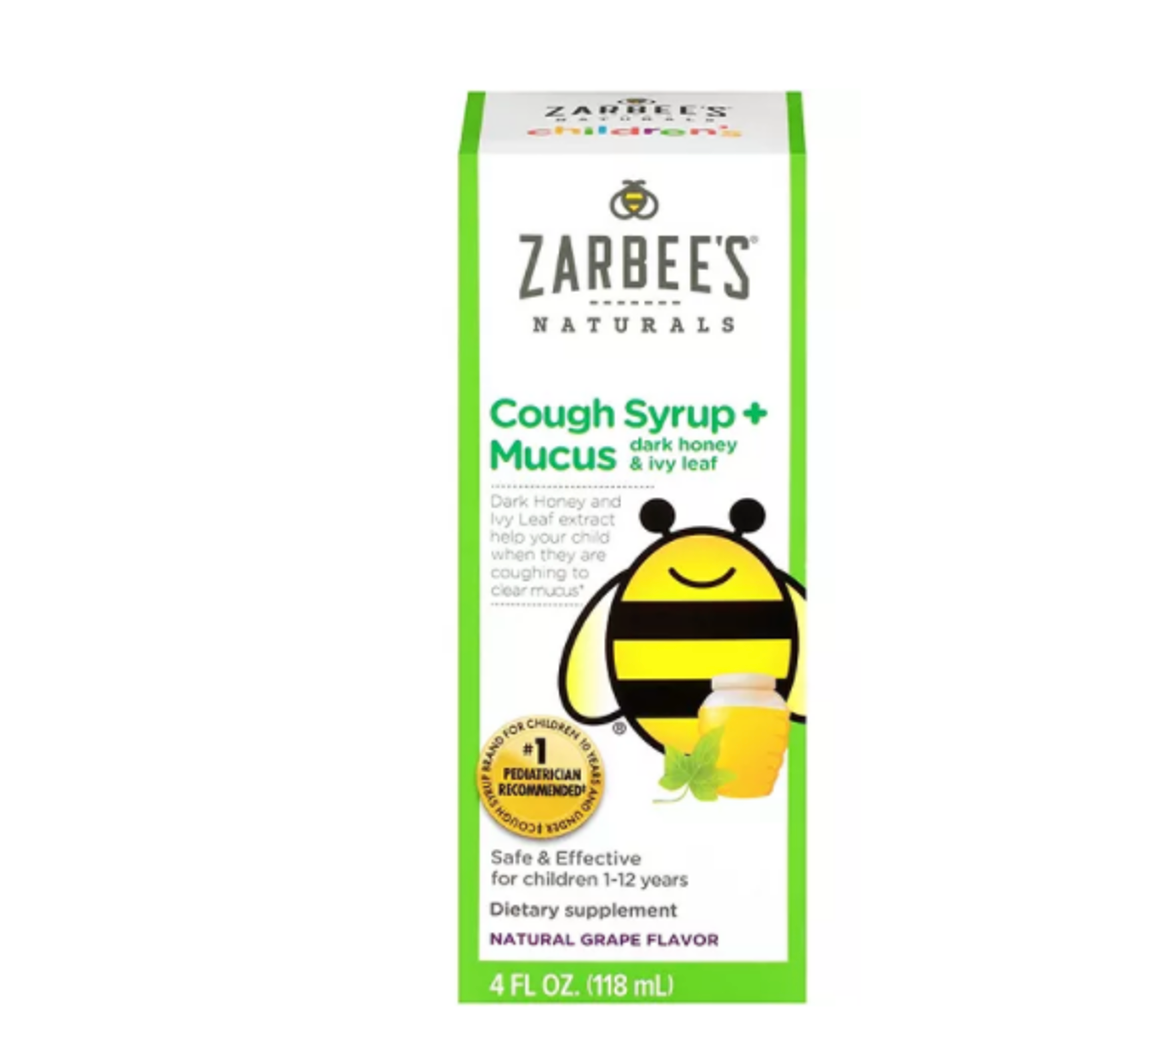 Daily OTC Pearl: Zarbee’s for Children's Cough